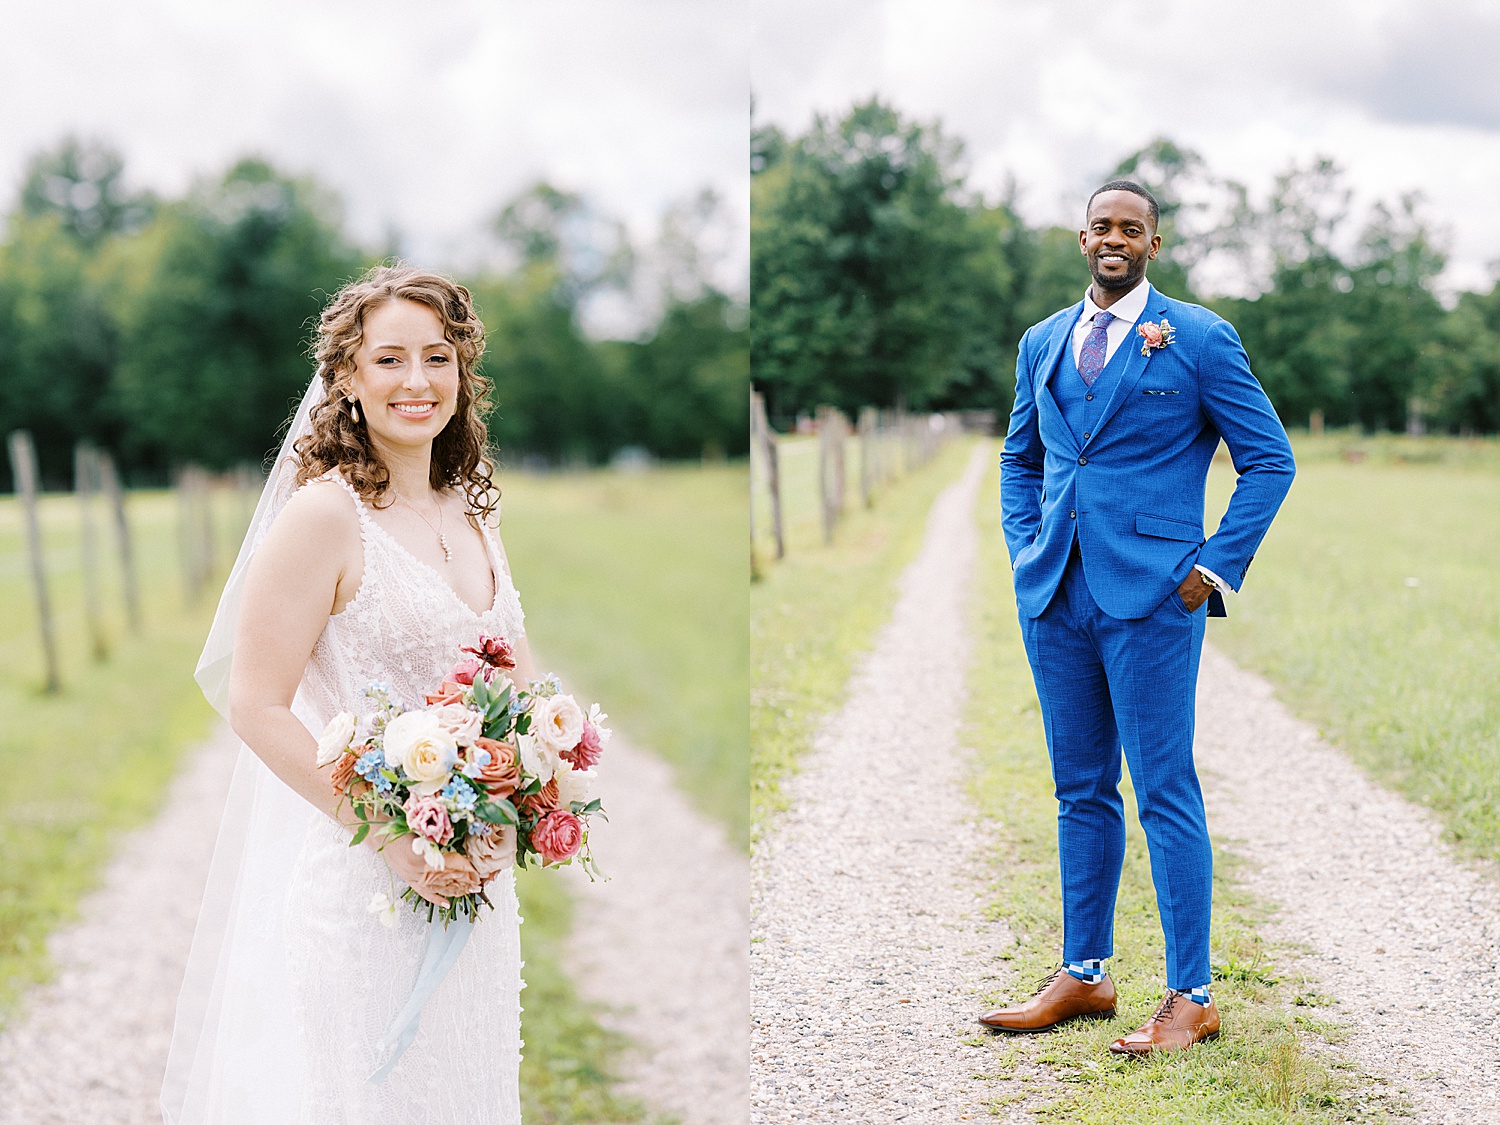 Bride in lace gown and groom in blue suit in a field by Lynne Reznick photography 